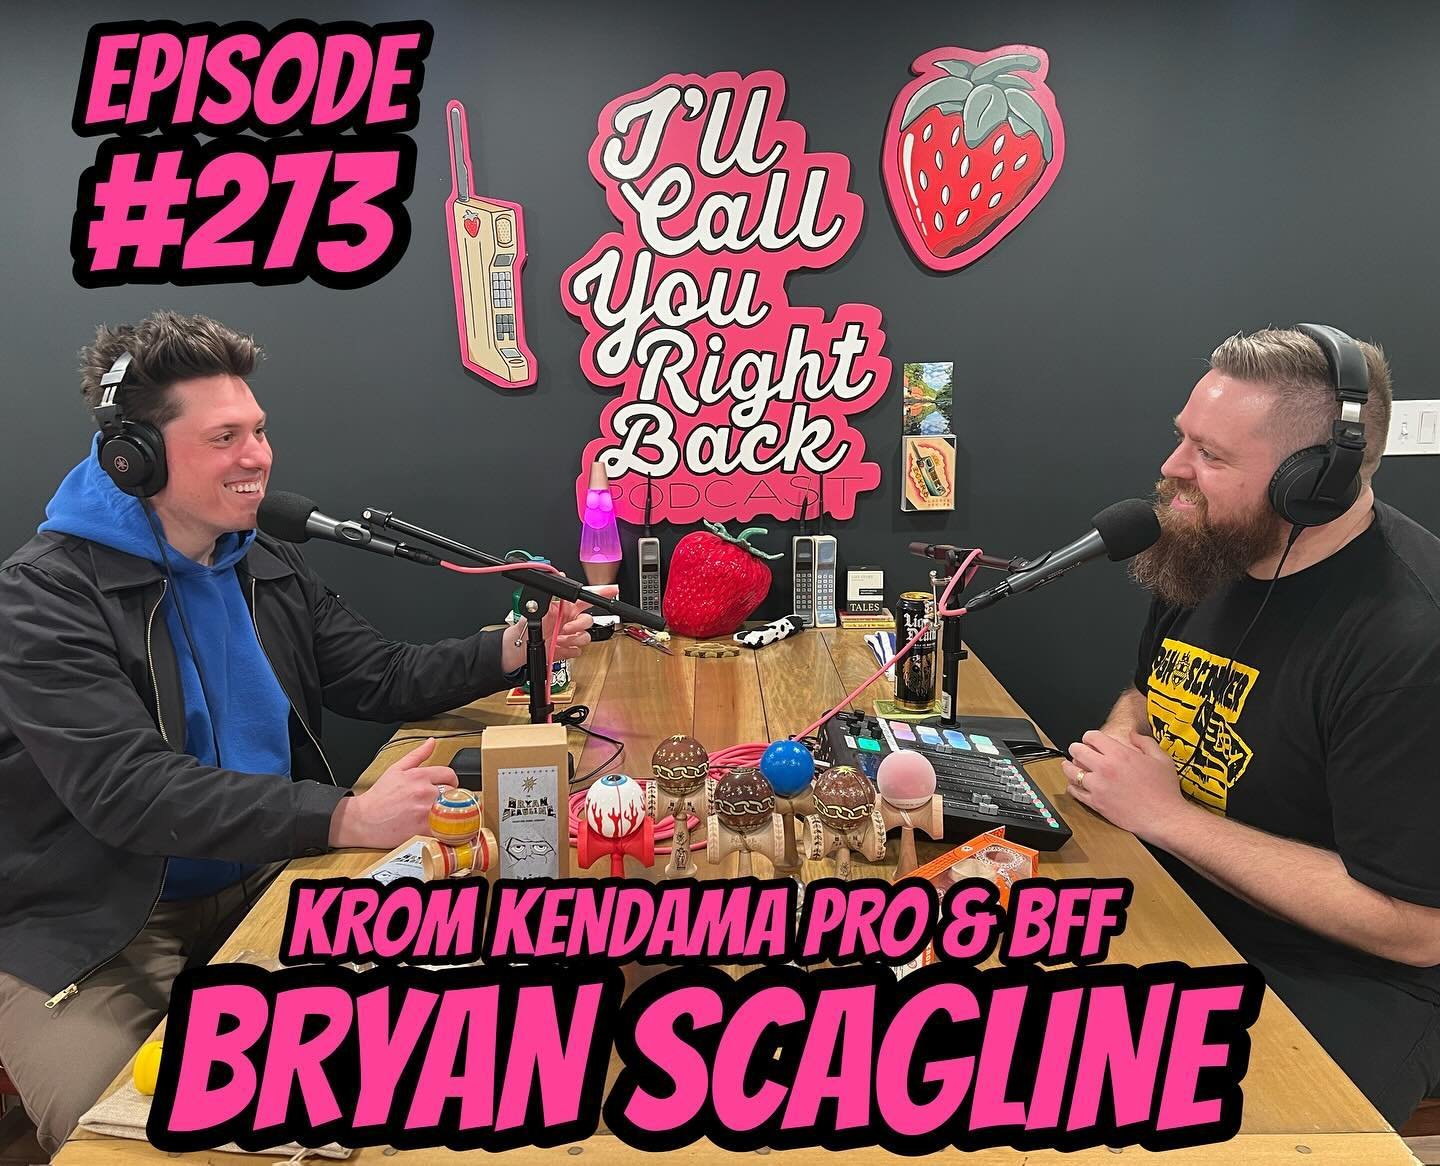 This week, I sit down with @kromkendama Pro Player and best friend @bryan_scagline to celebrate all of his hard work and his accomplishments. Bryan has been a well known figure spreading positivity in the Kendama community for over a decade. Starting